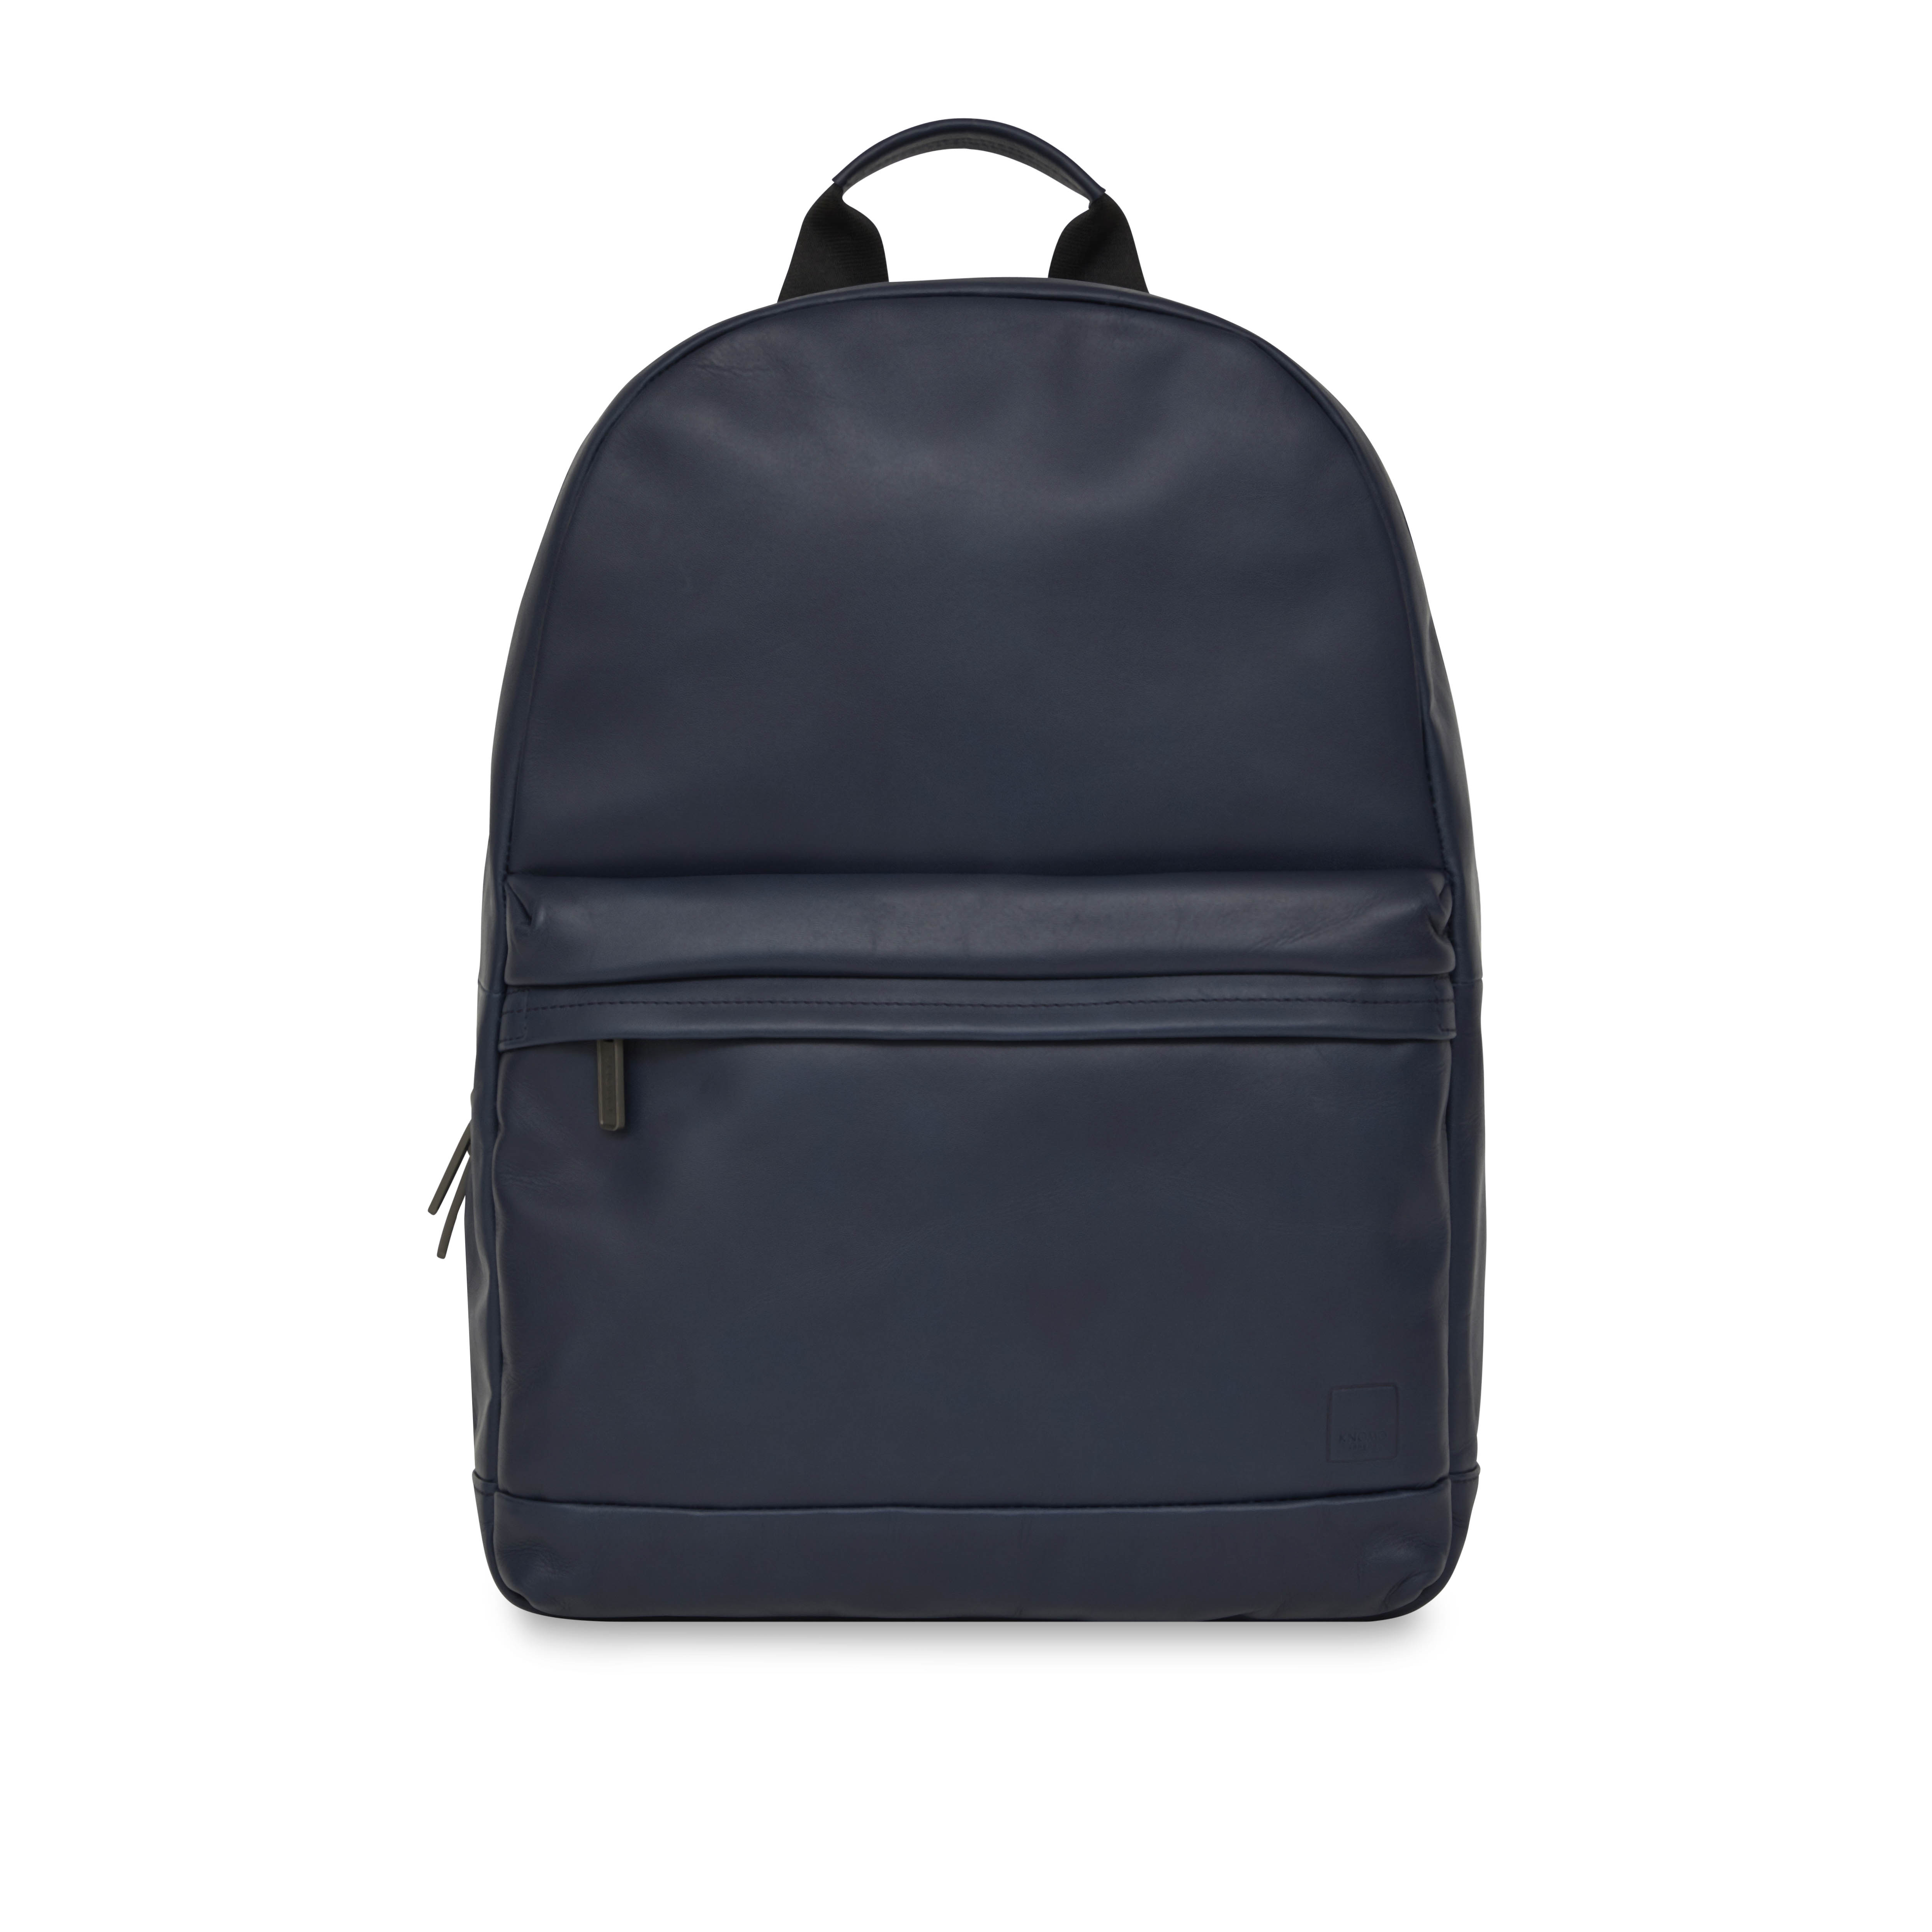 Albion Leather Backpack